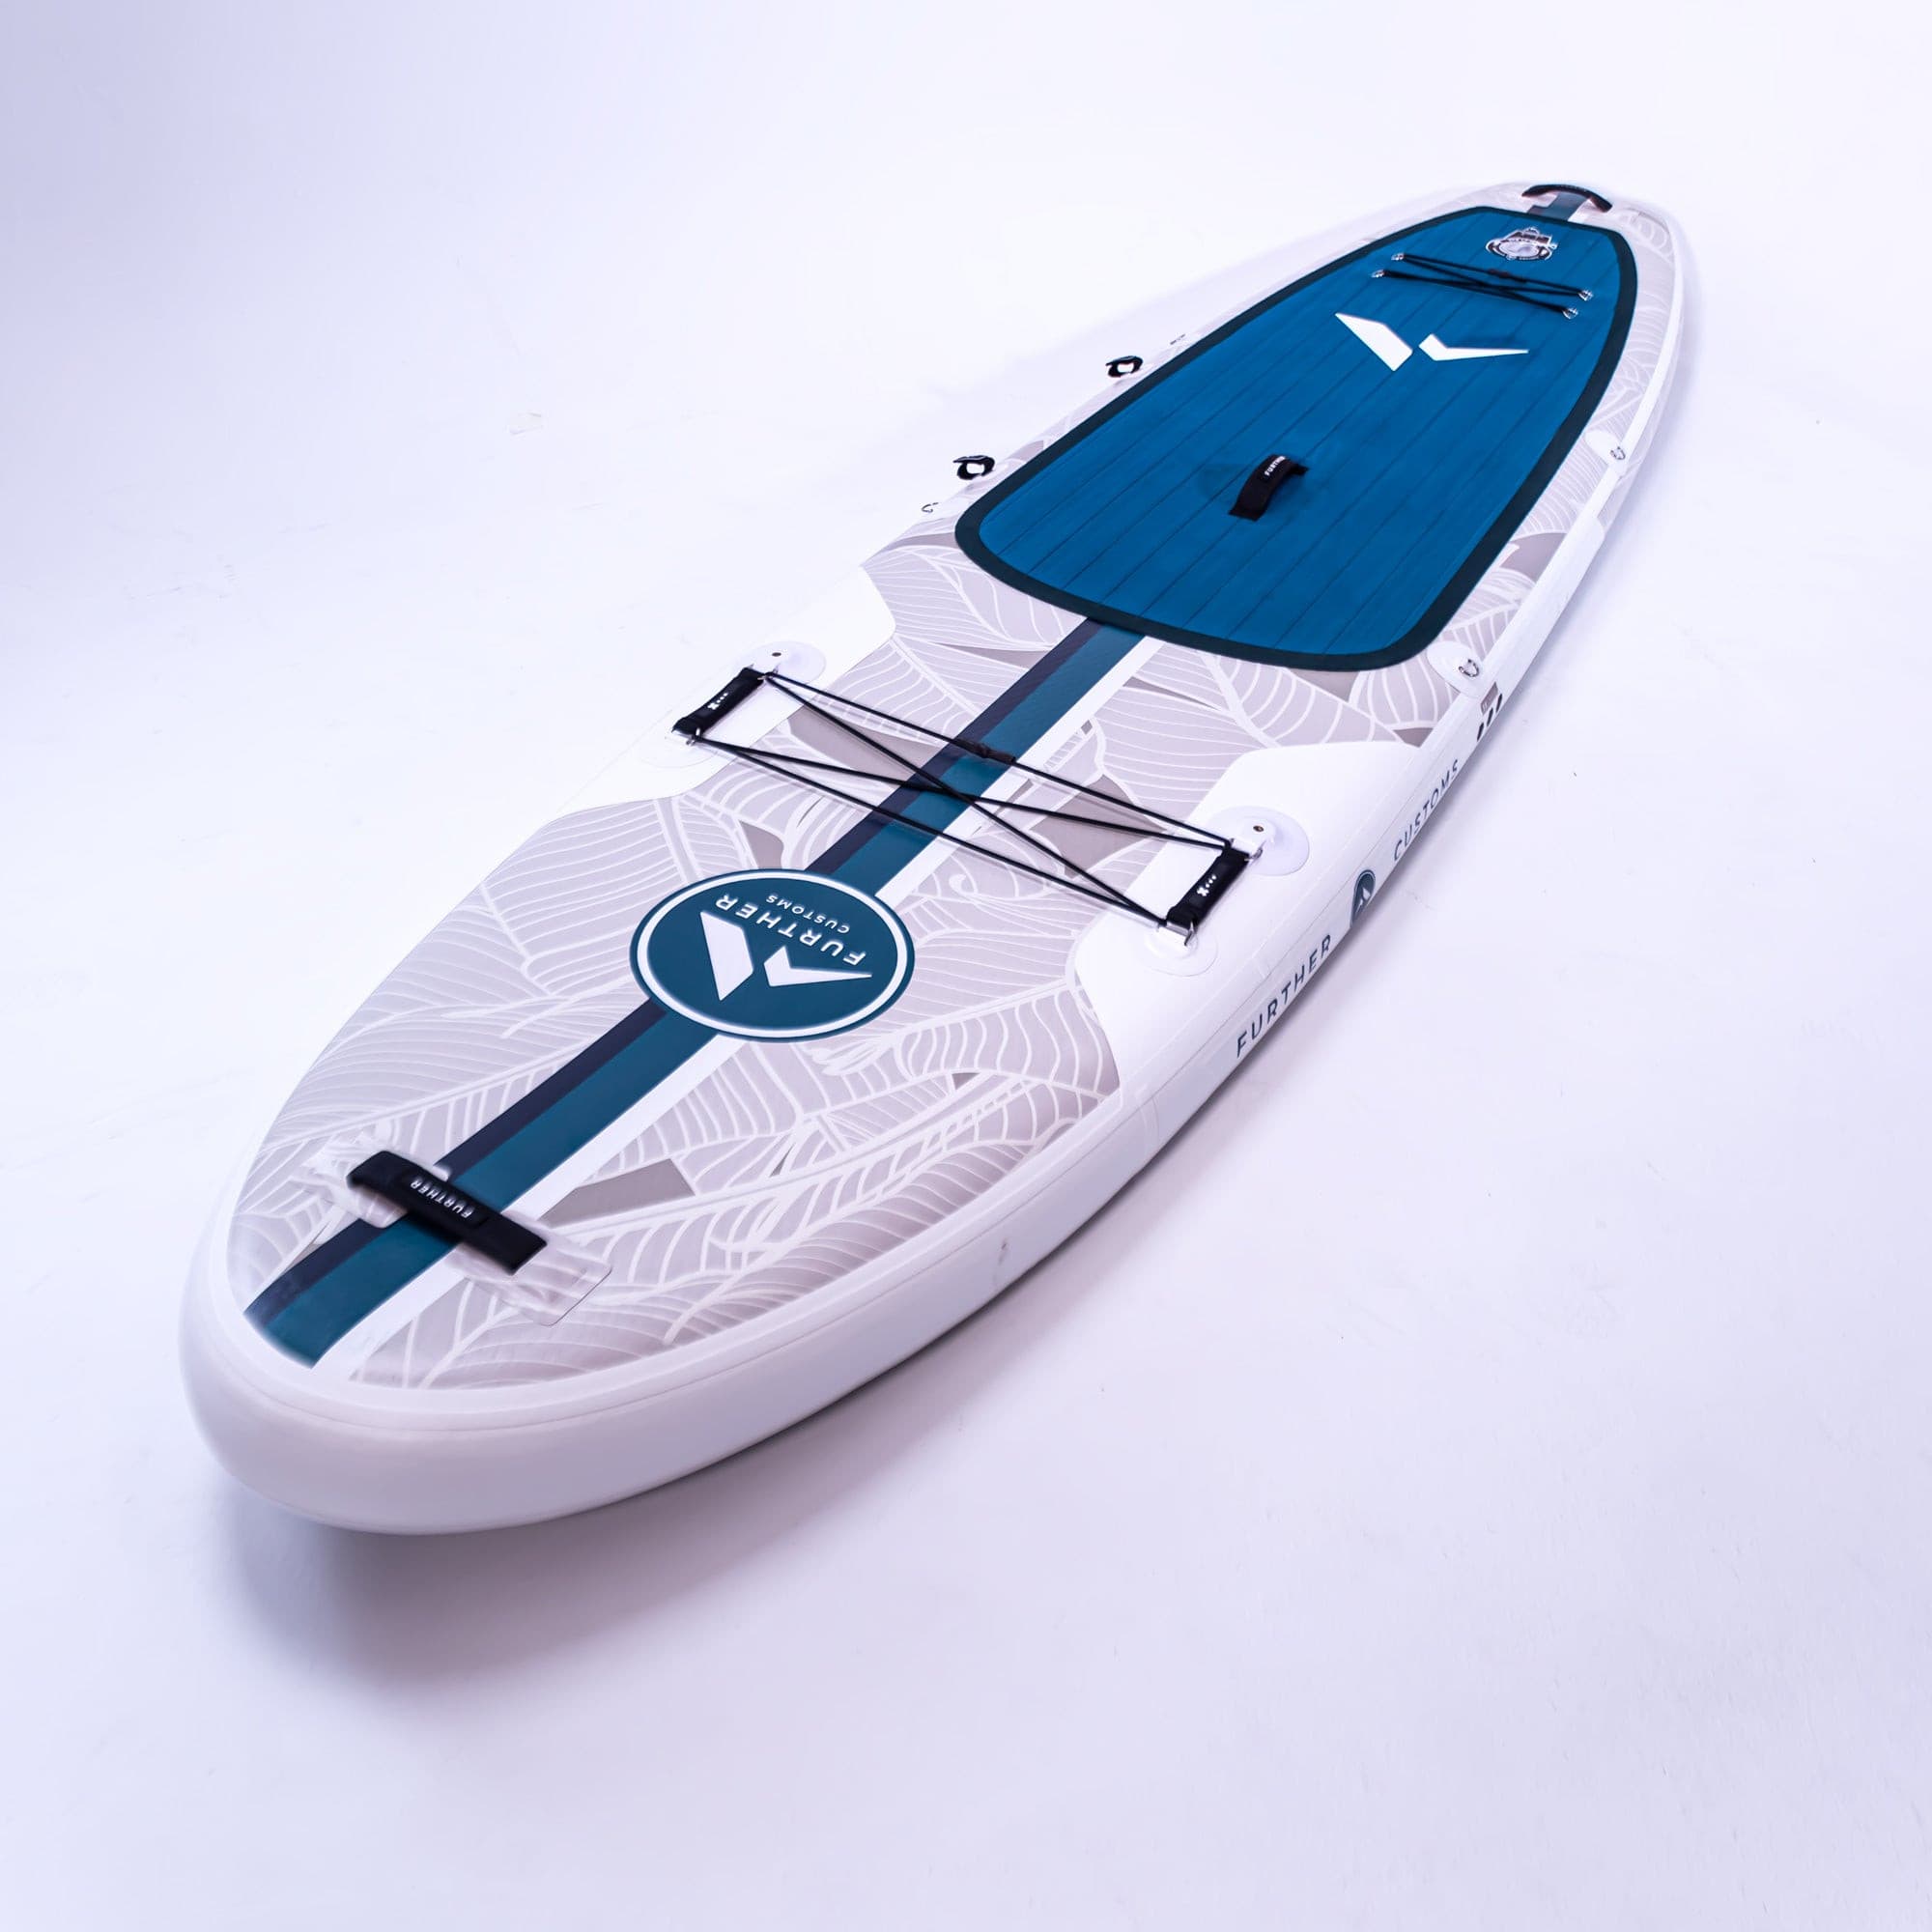 Further Customs Avalon Emerald Inflatable Paddleboard Kit Top